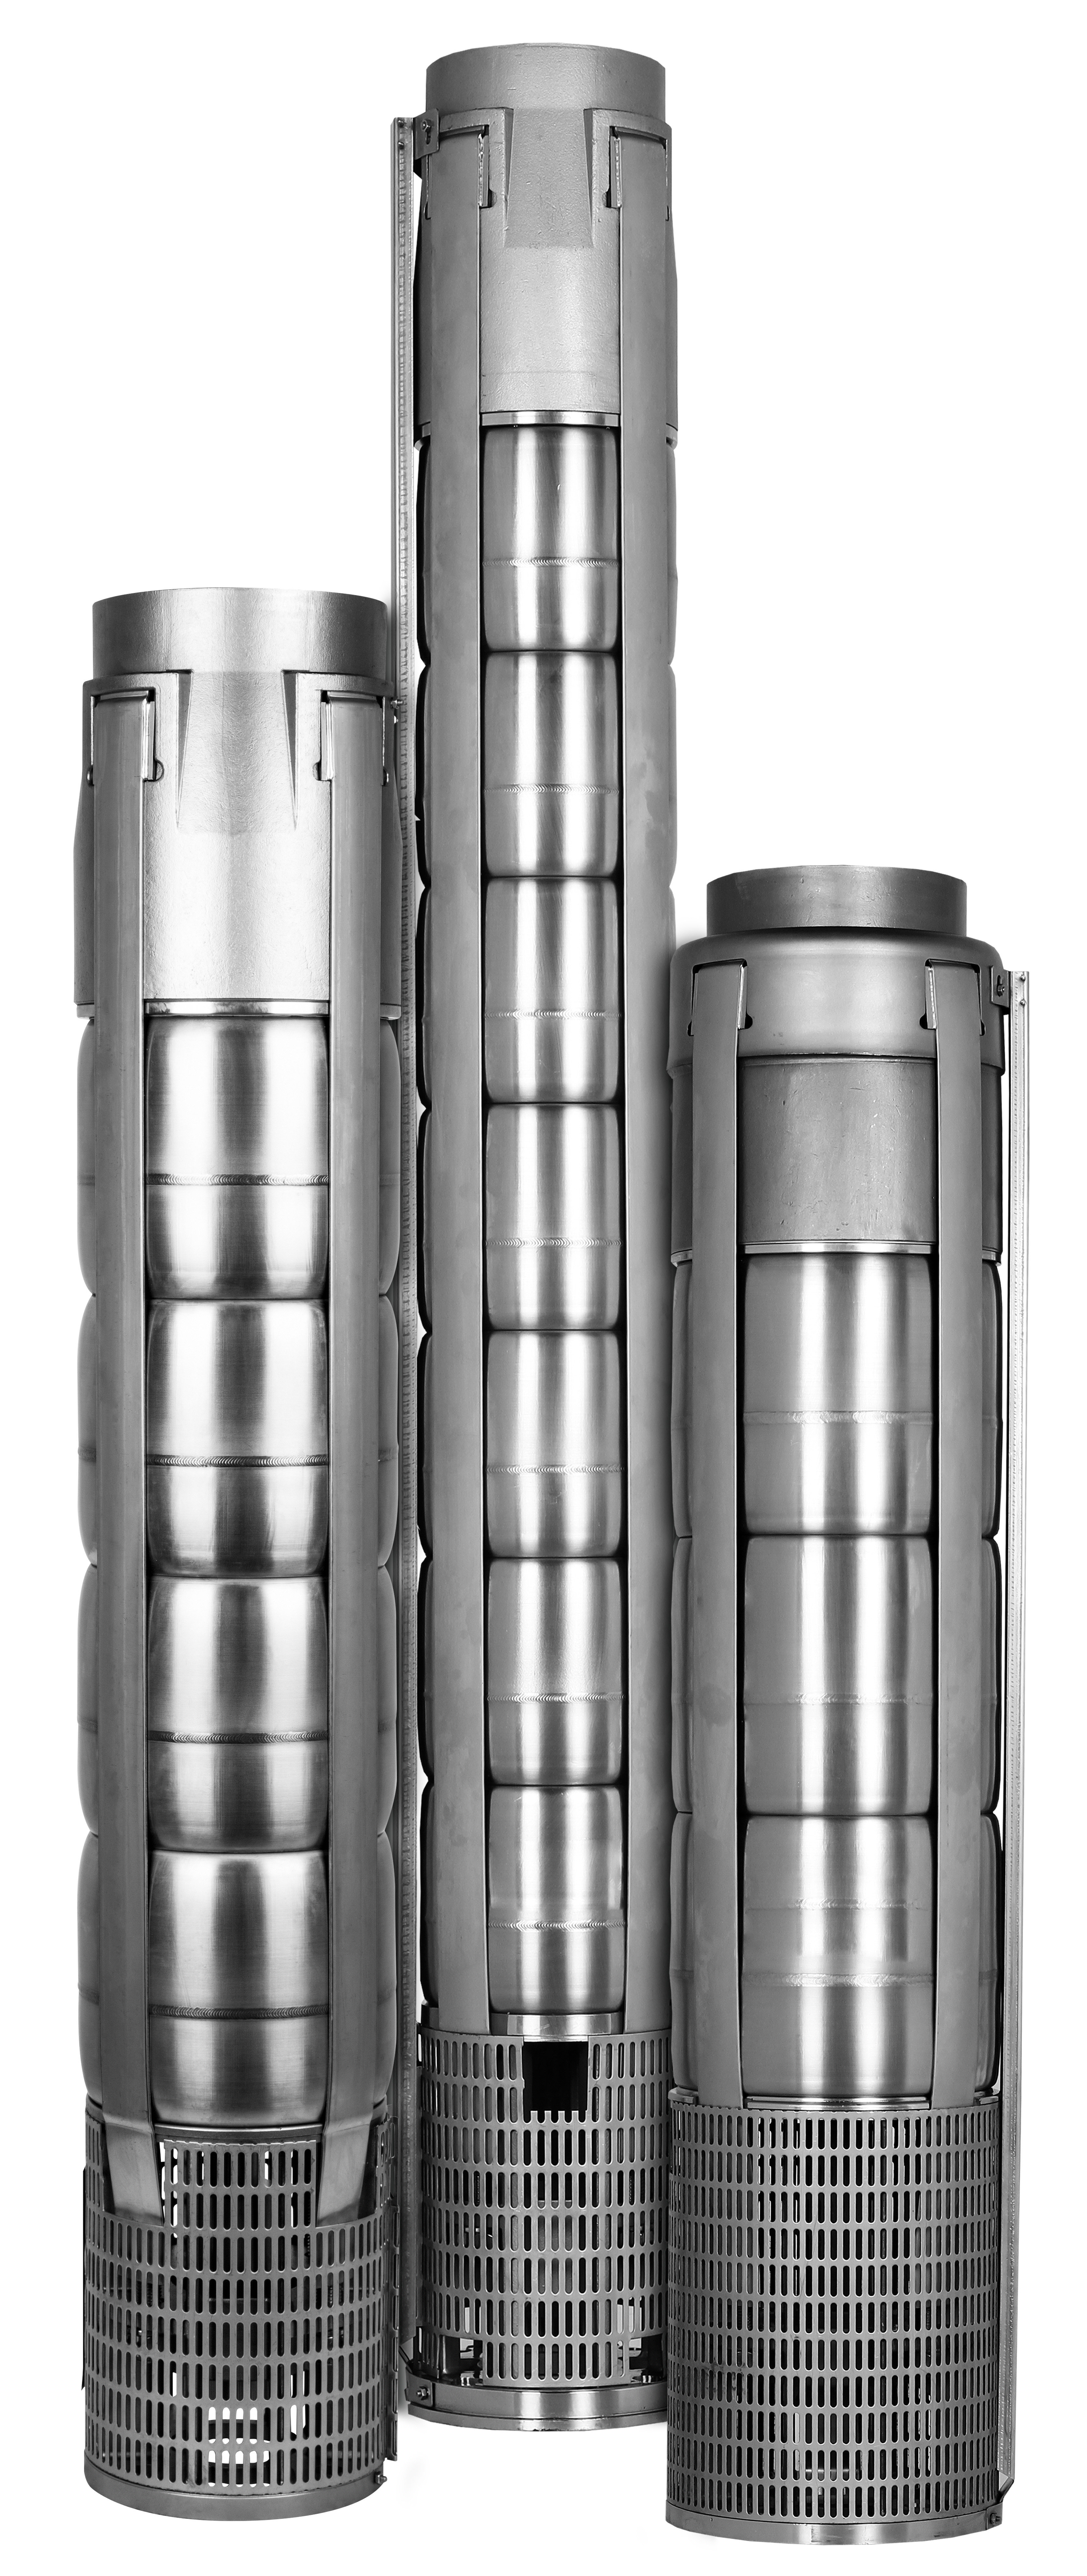 The New SSI Series Submersible Pumps